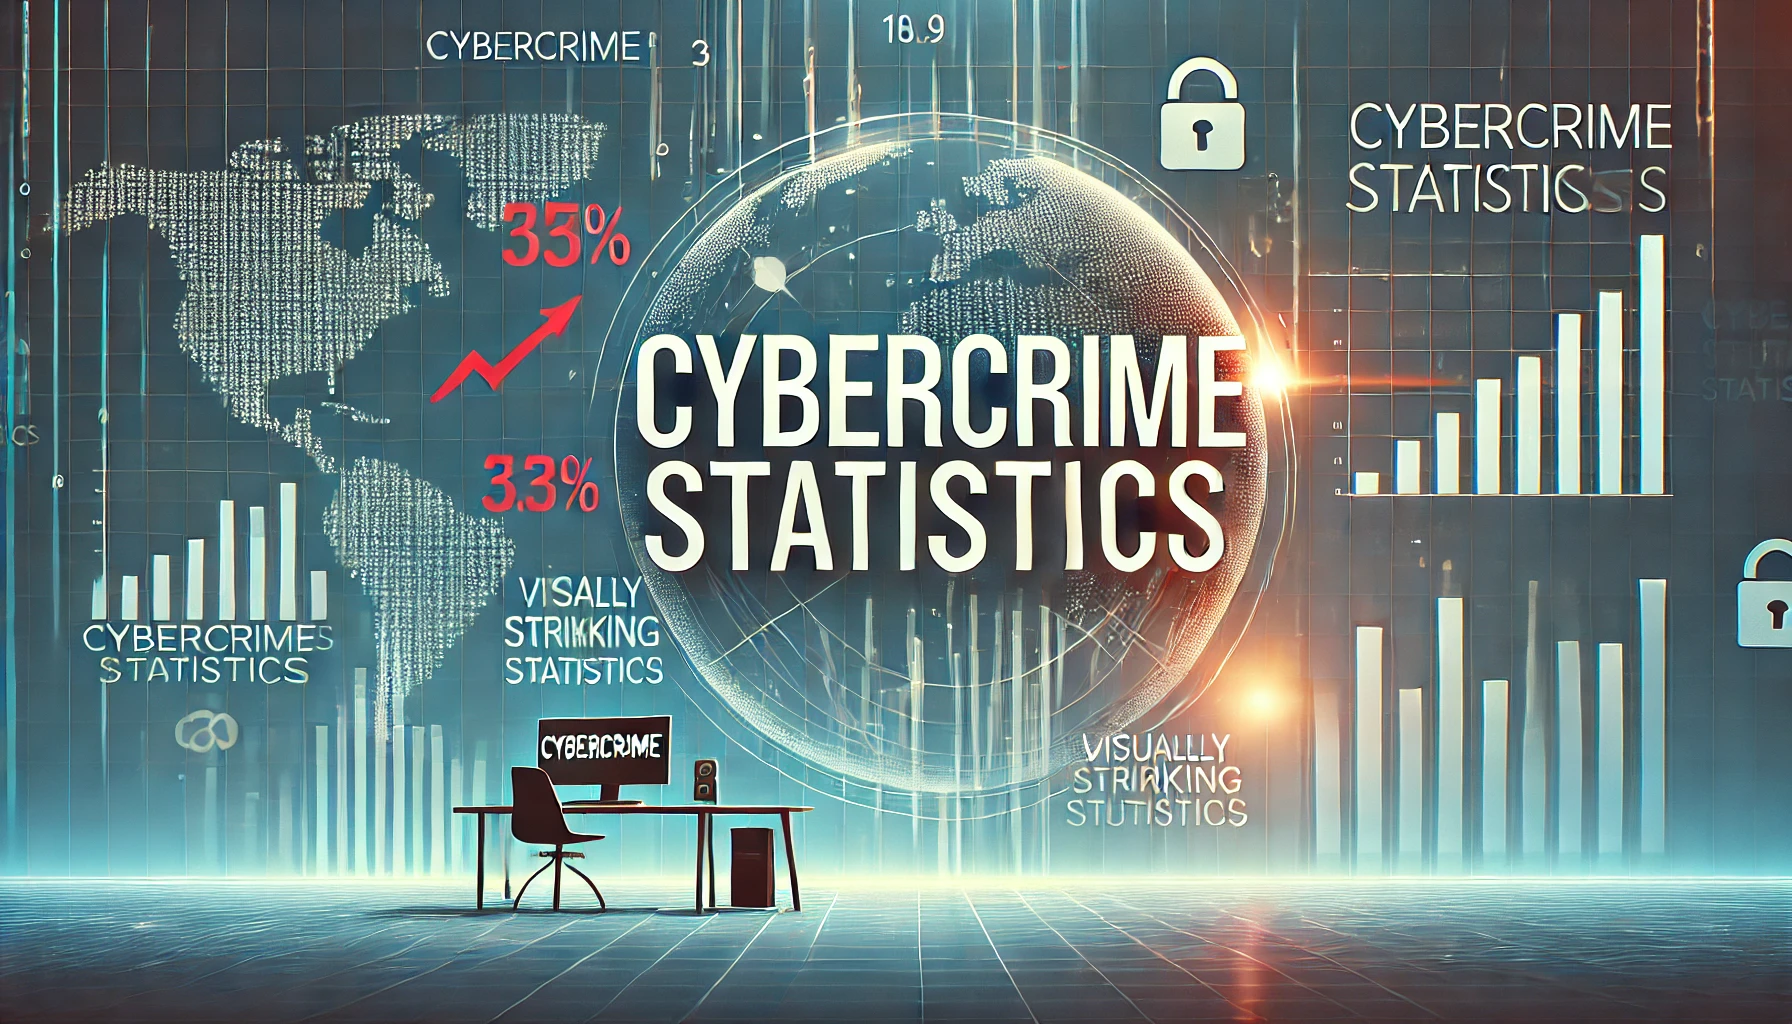 Cybercrime Statistics By Cyber Attacks, Concerns and Facts